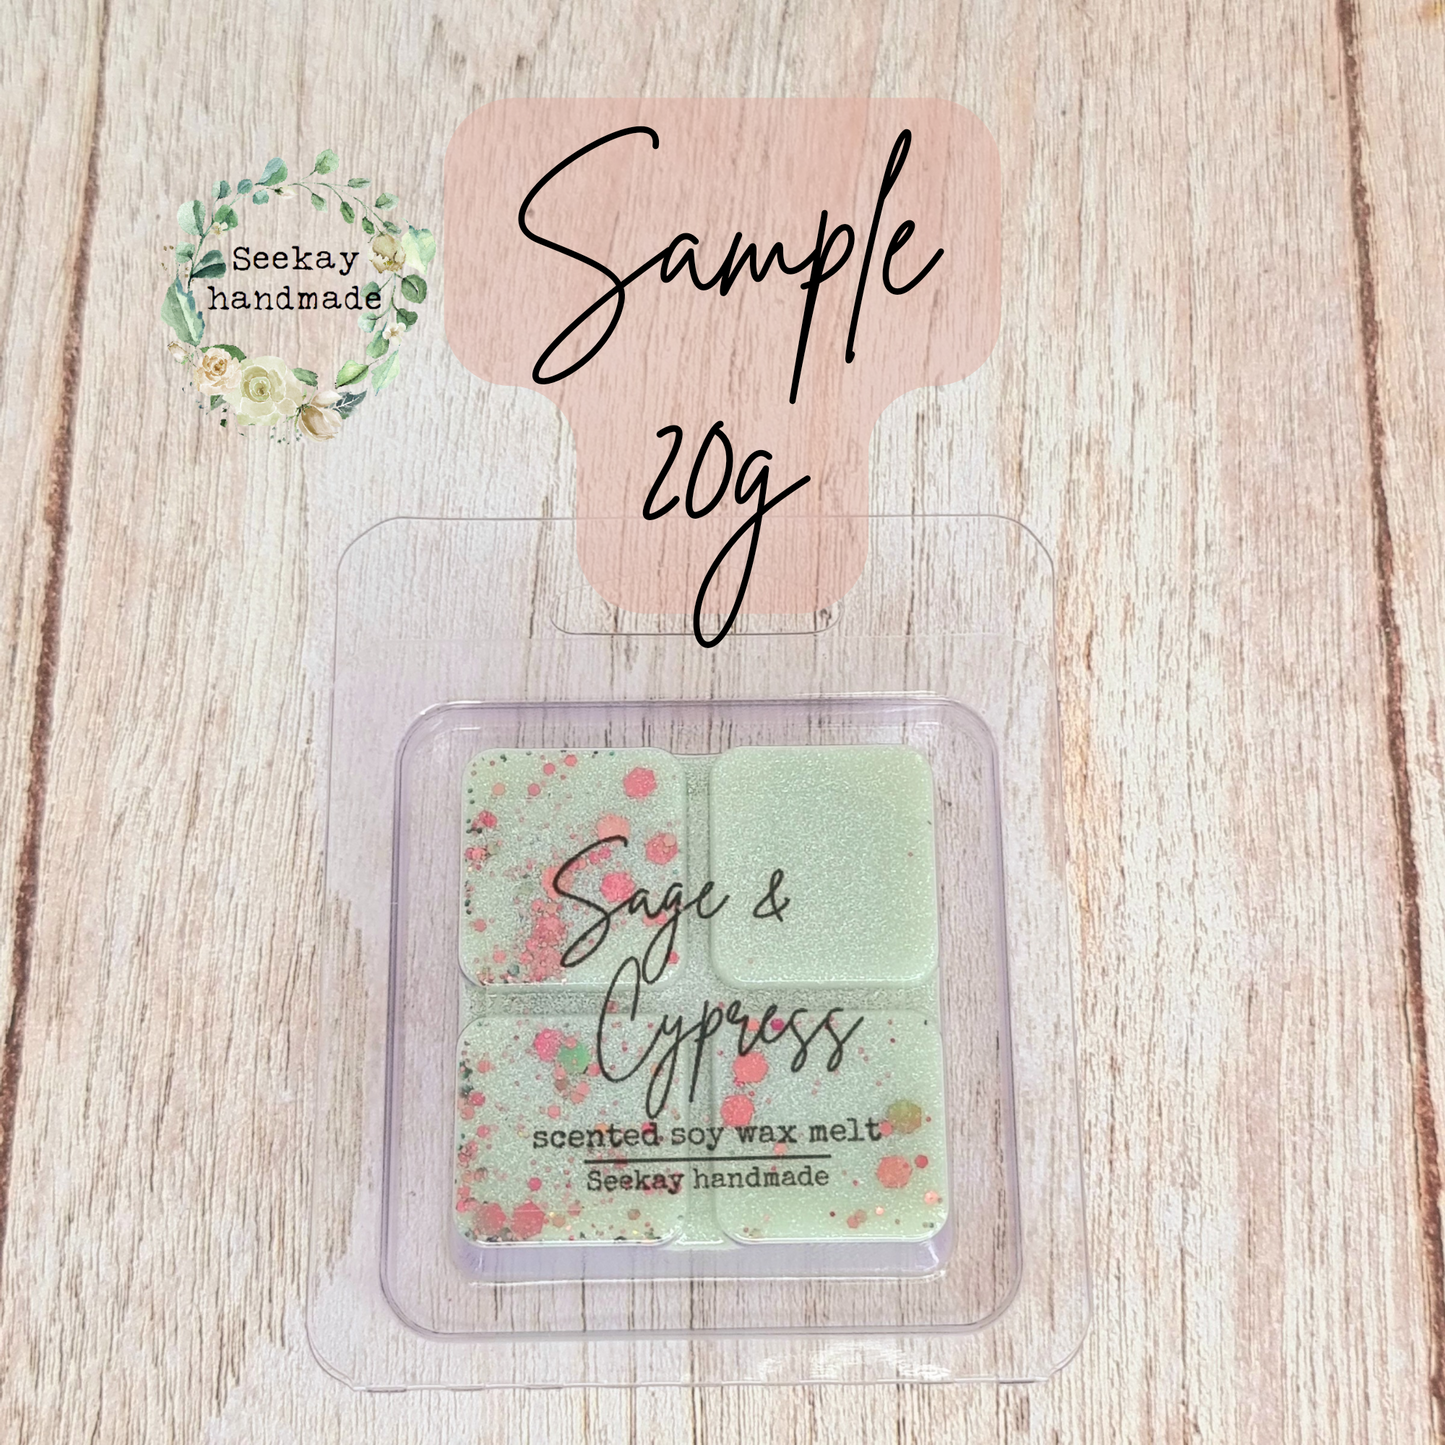 Sage & Cypress scented soy wax melt